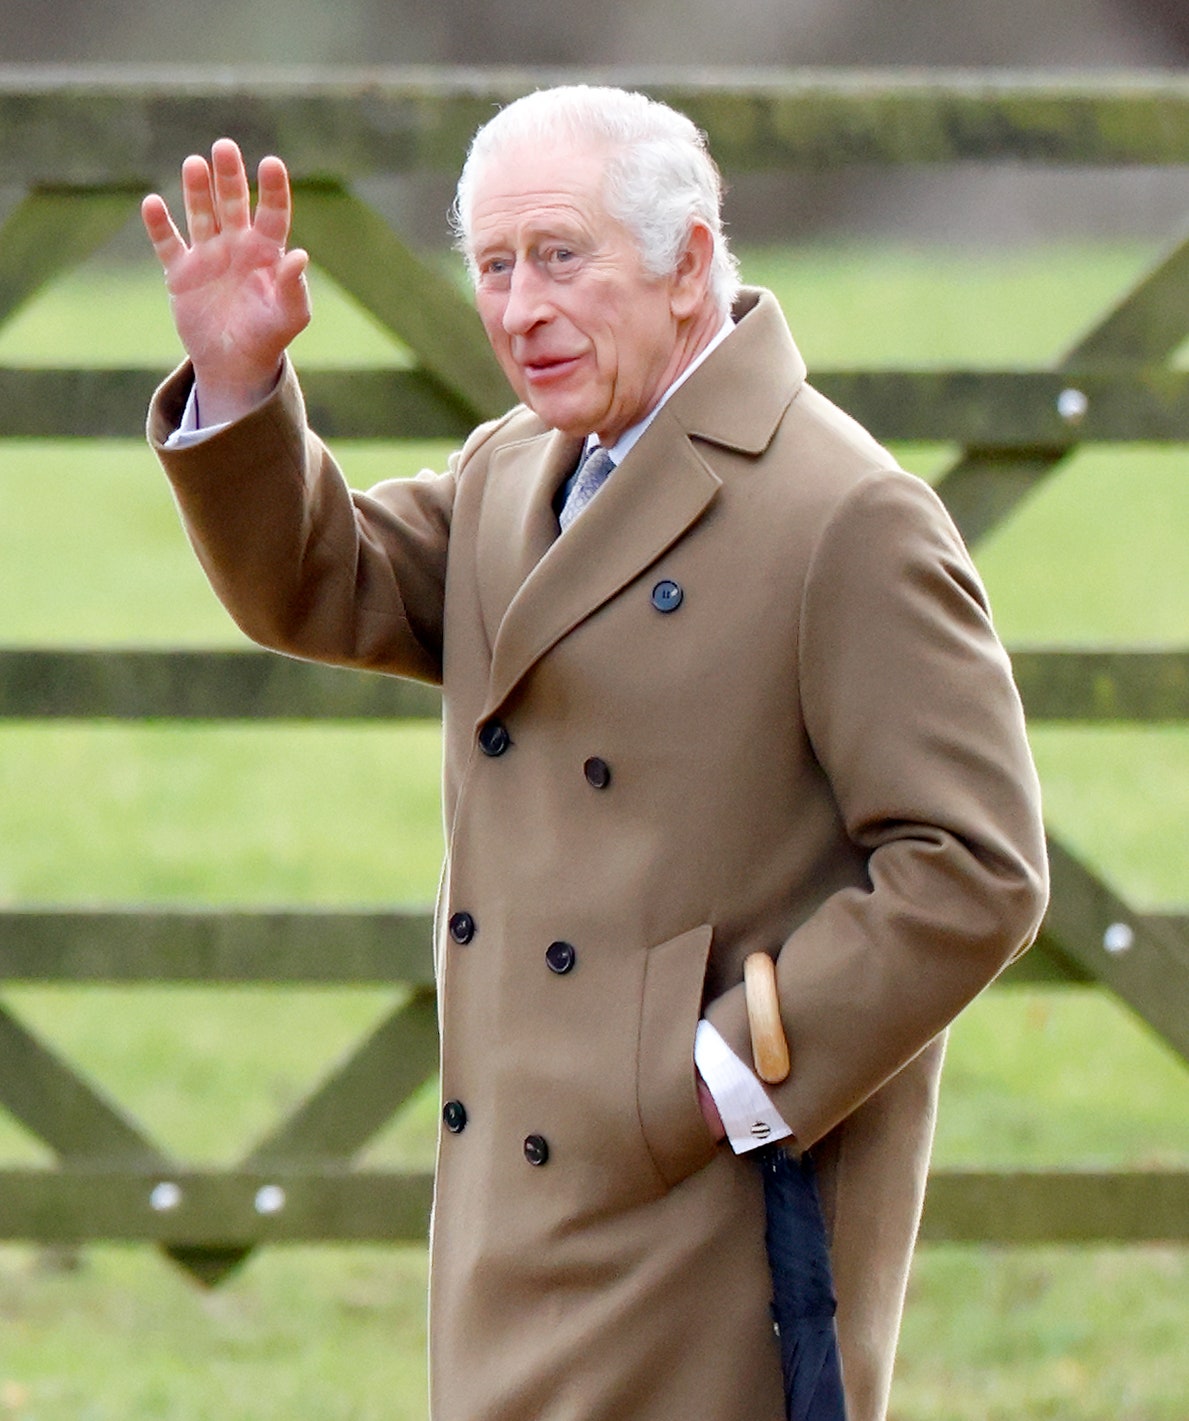 King Charles Has Been Admitted to a London Hospital For a Prostate Procedure